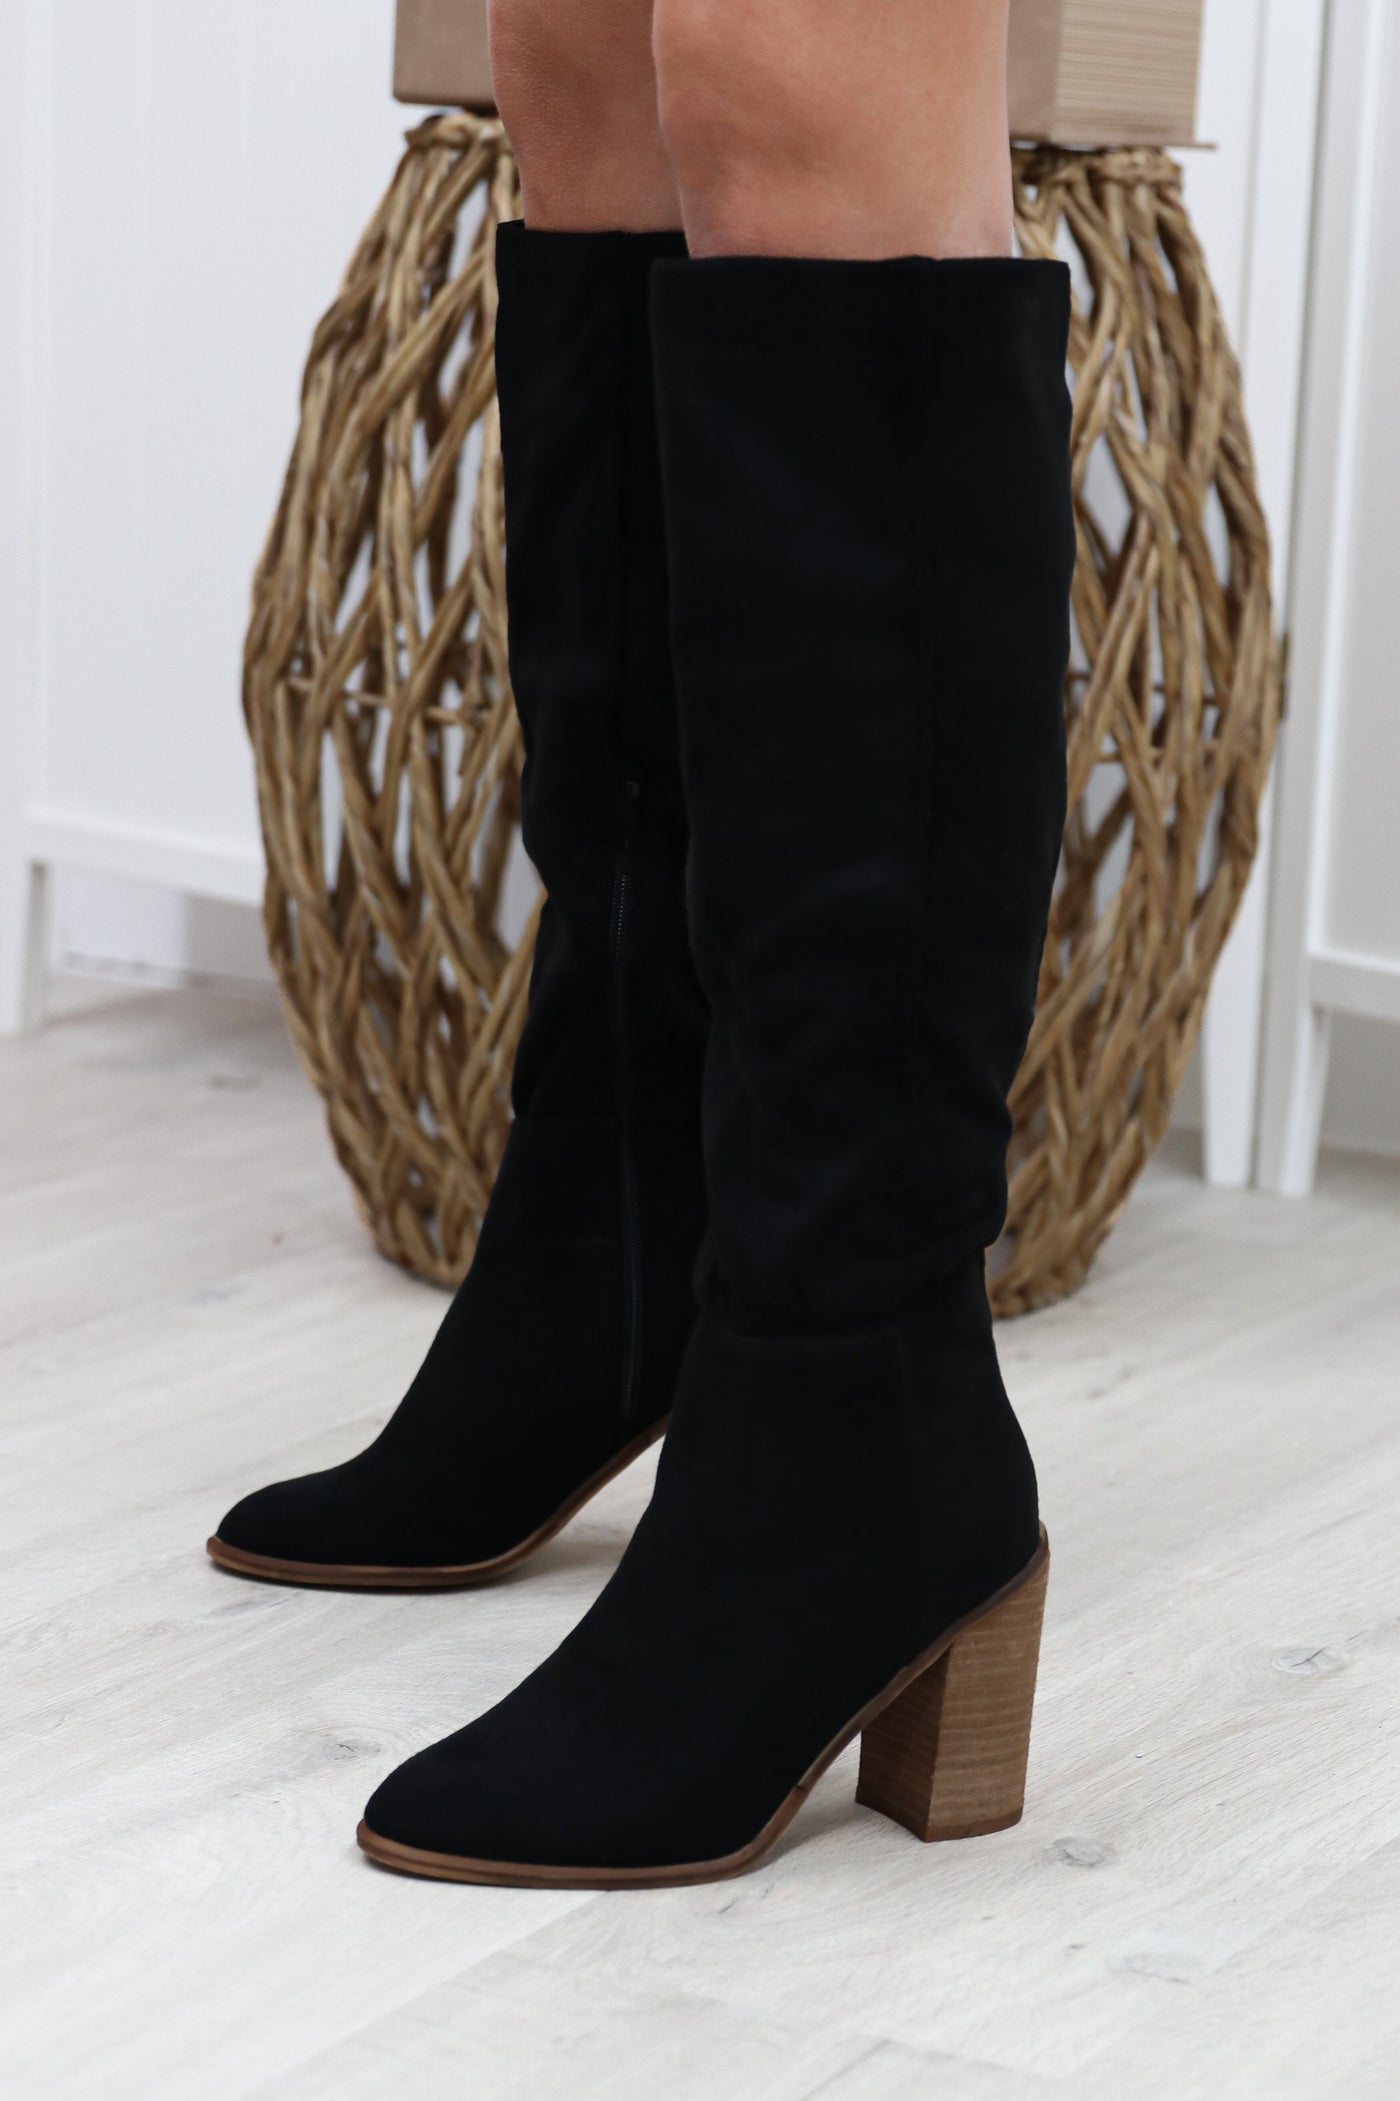 Georgia Knee High Boots (Black) - Happily Ever Aften